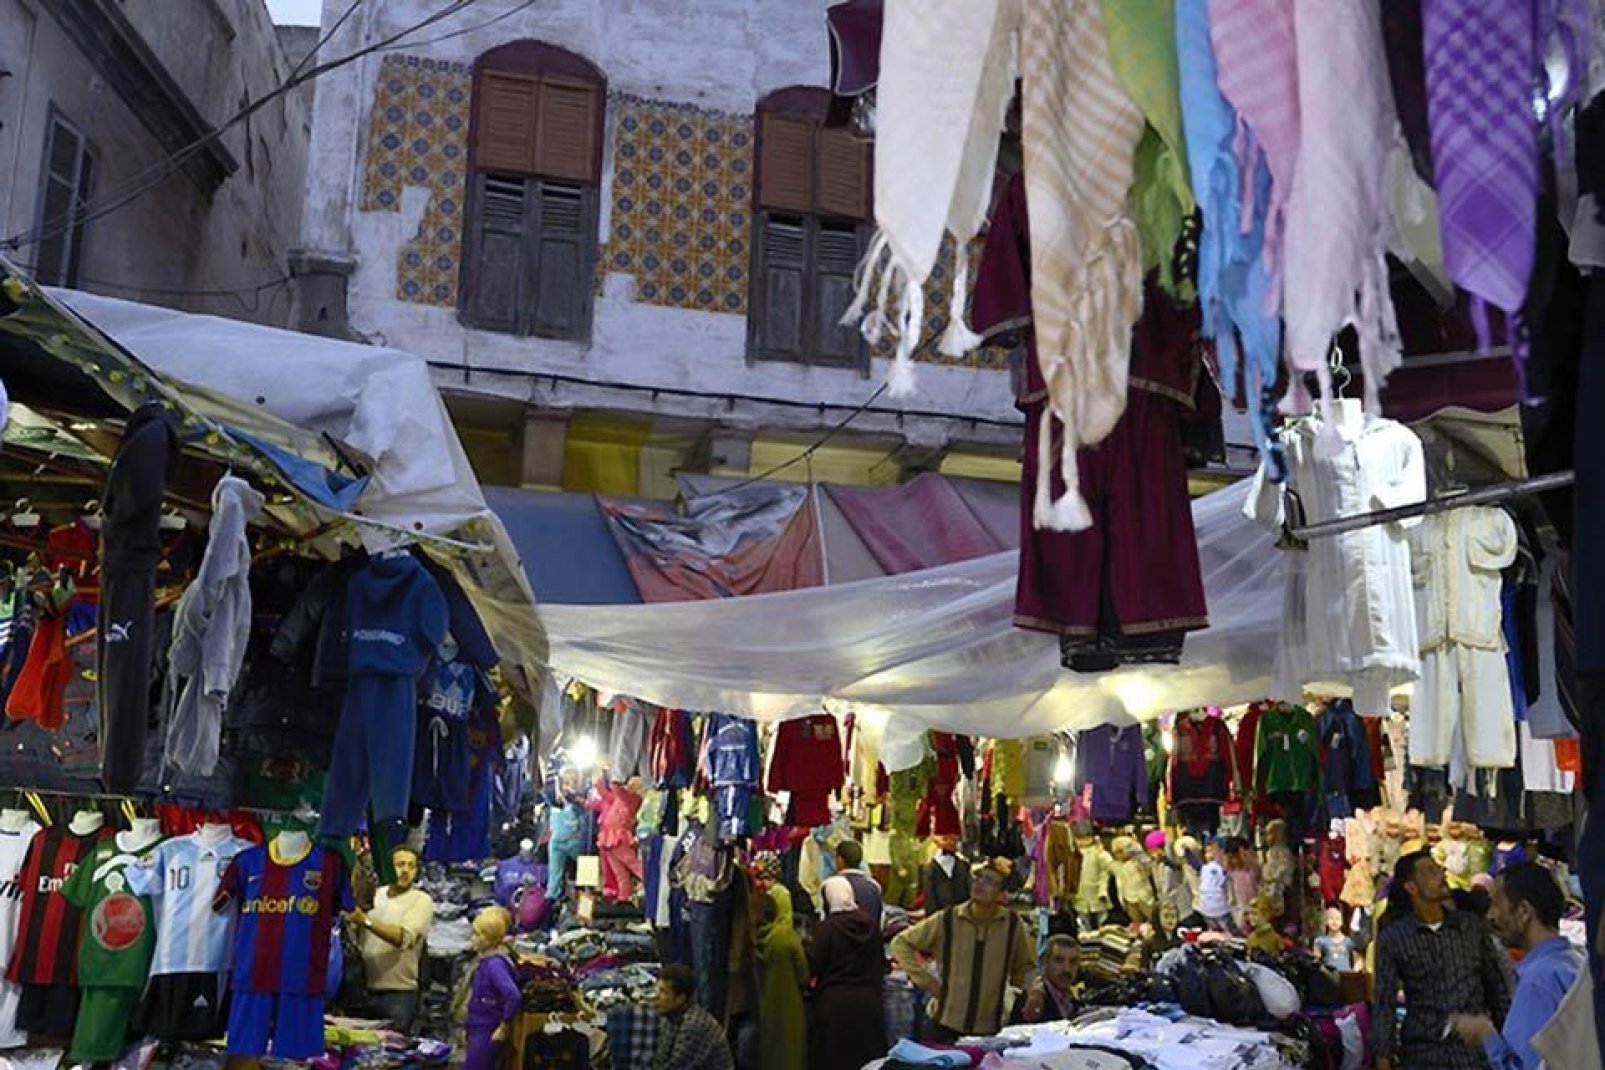 A place of overwhelming temptation for shopoholics, the souks hold many a hidden treasure